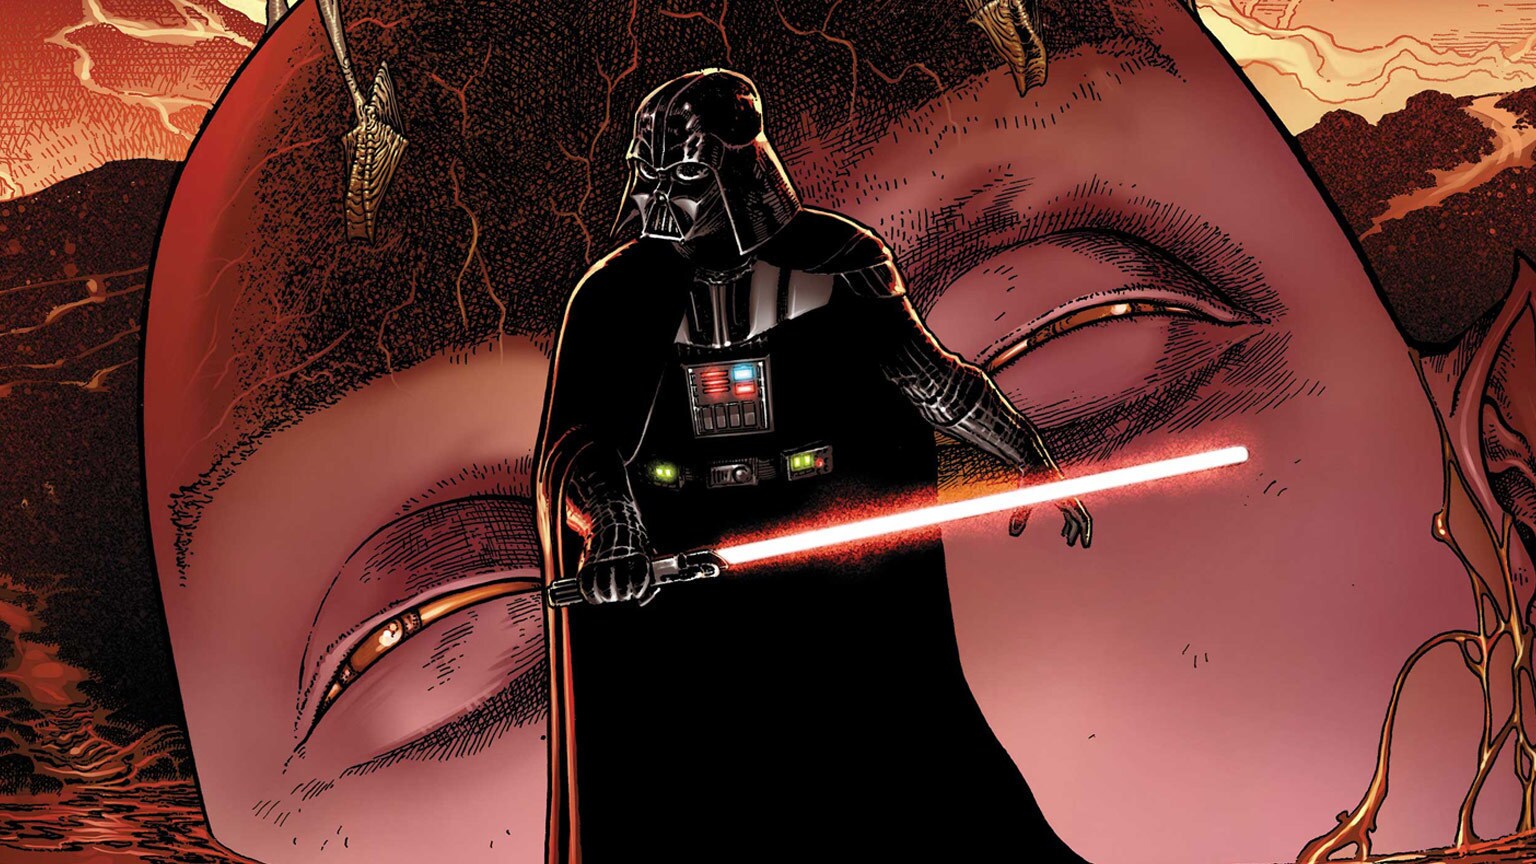 Vader Faces an Unknown Foe in Marvel’s Darth Vader #8 - Exclusive Preview